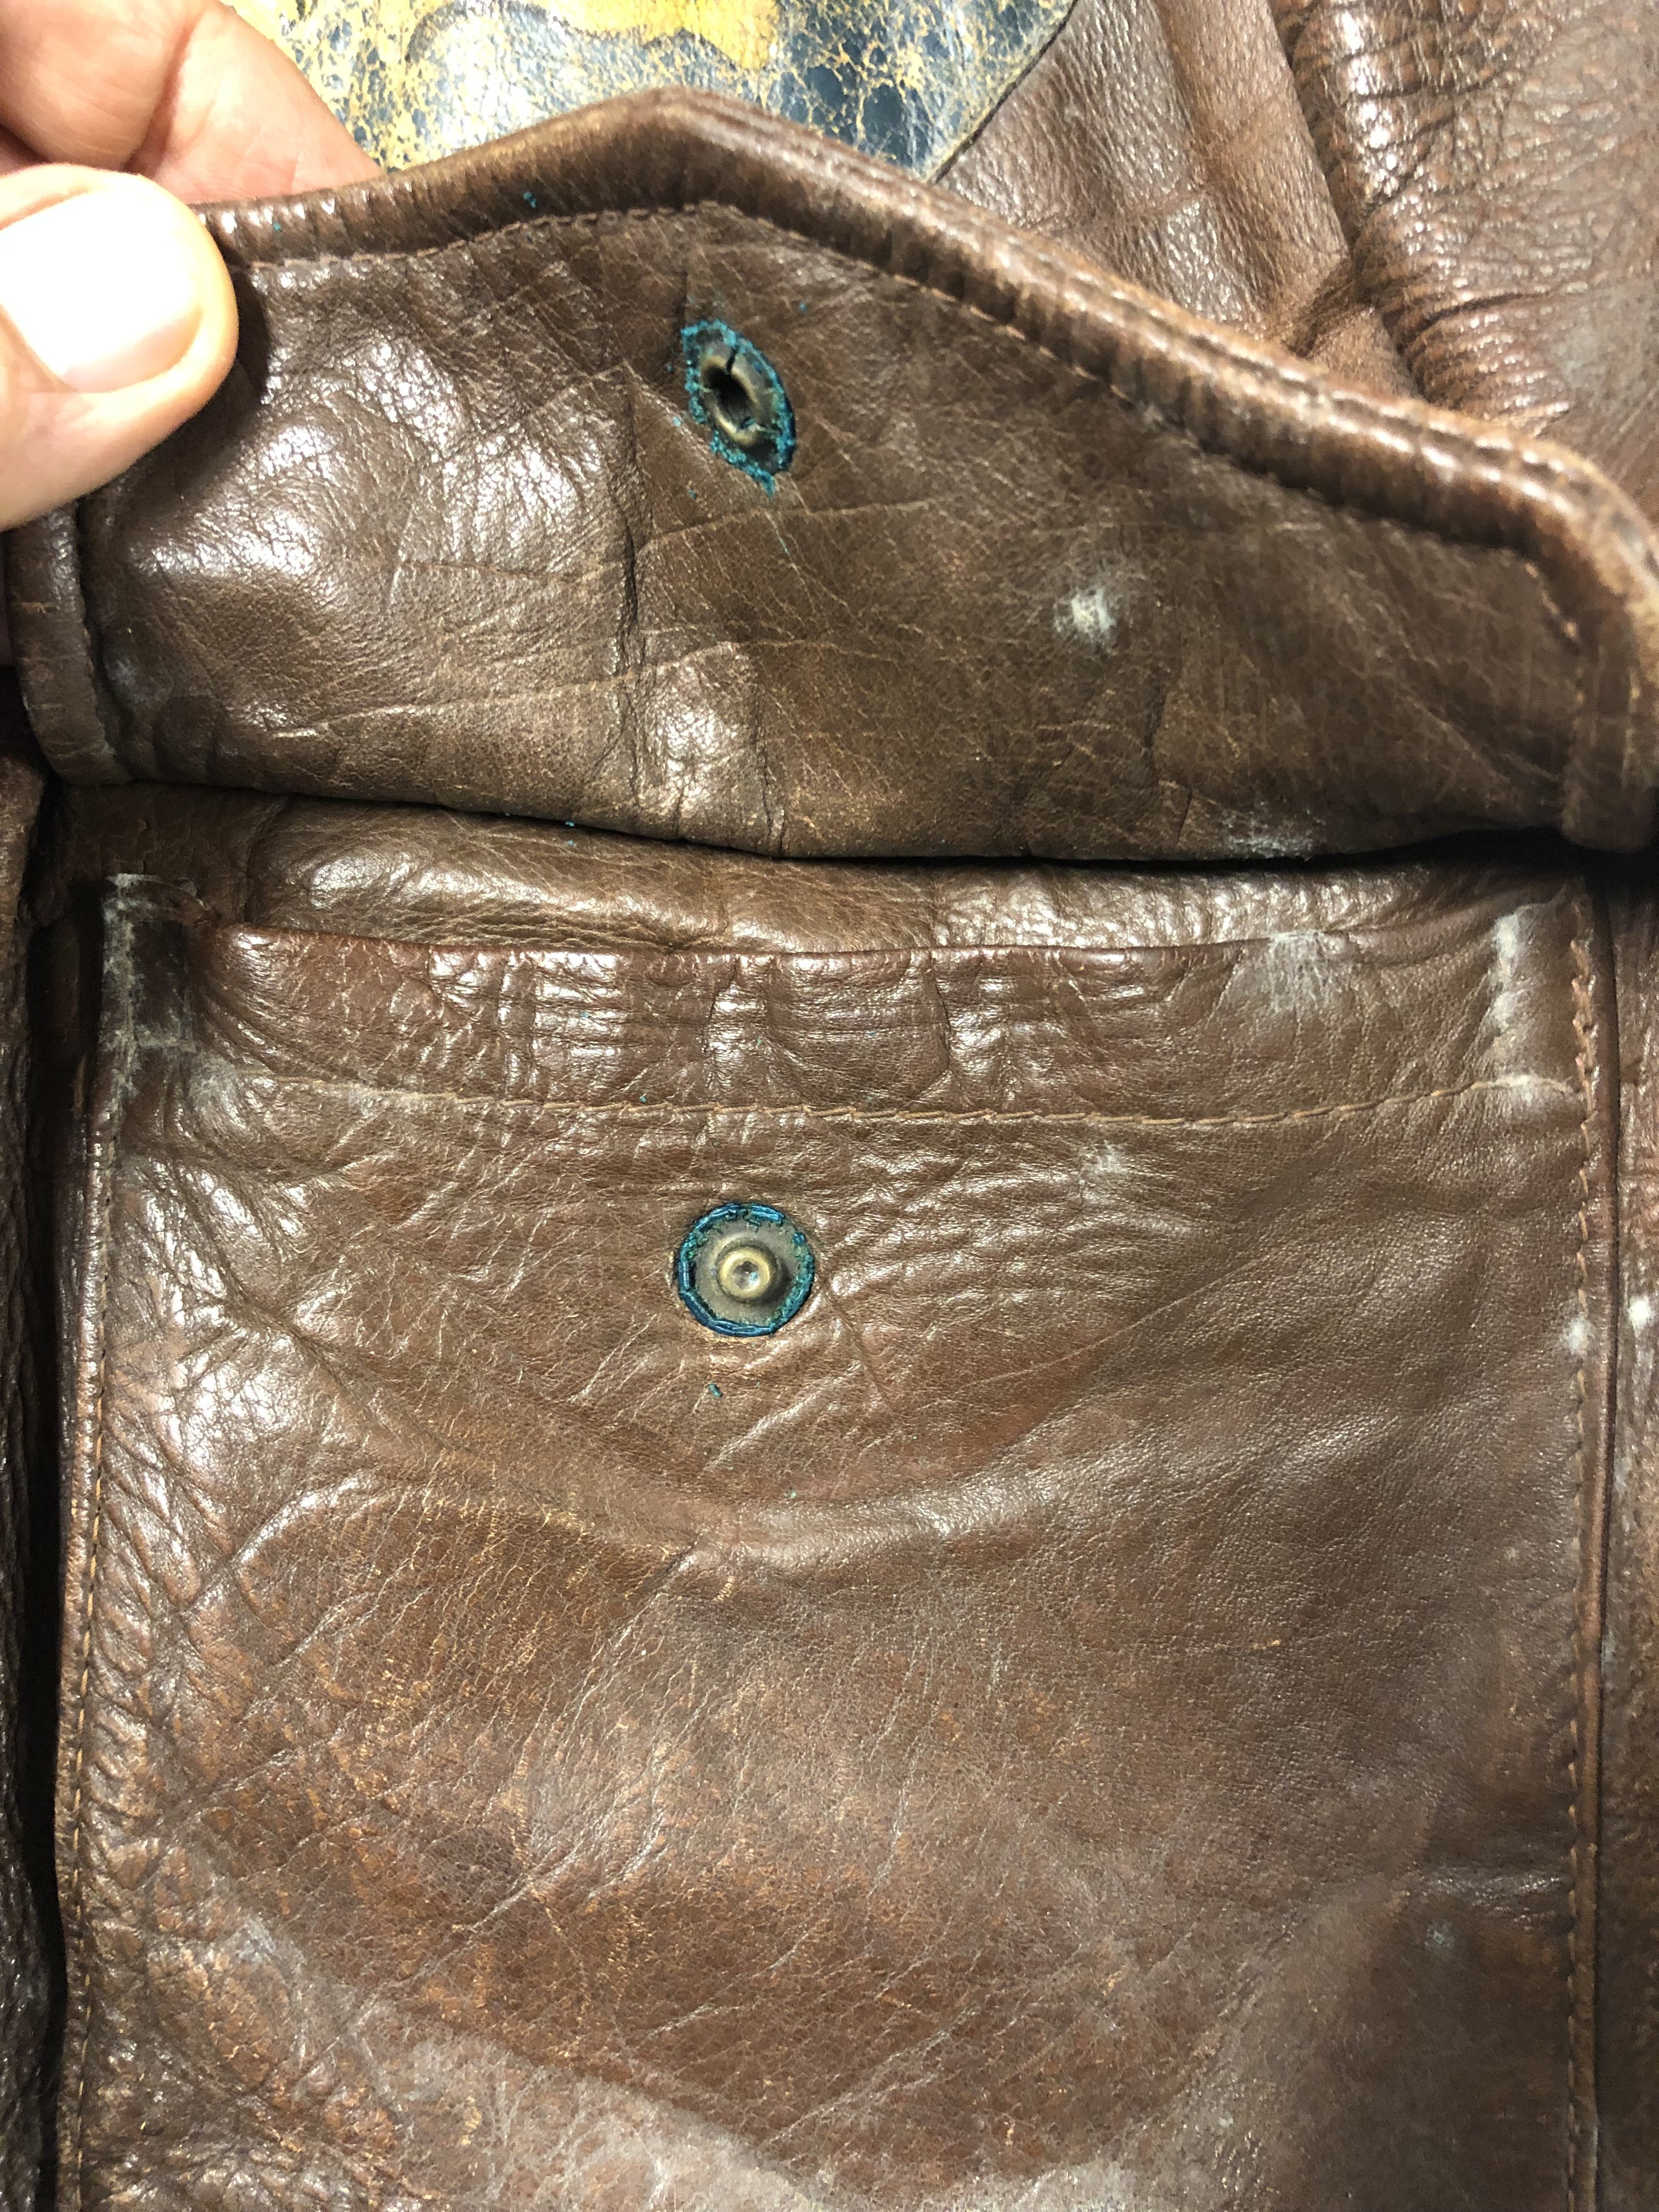 An Original A2 with a cool history! | Vintage Leather Jackets Forum